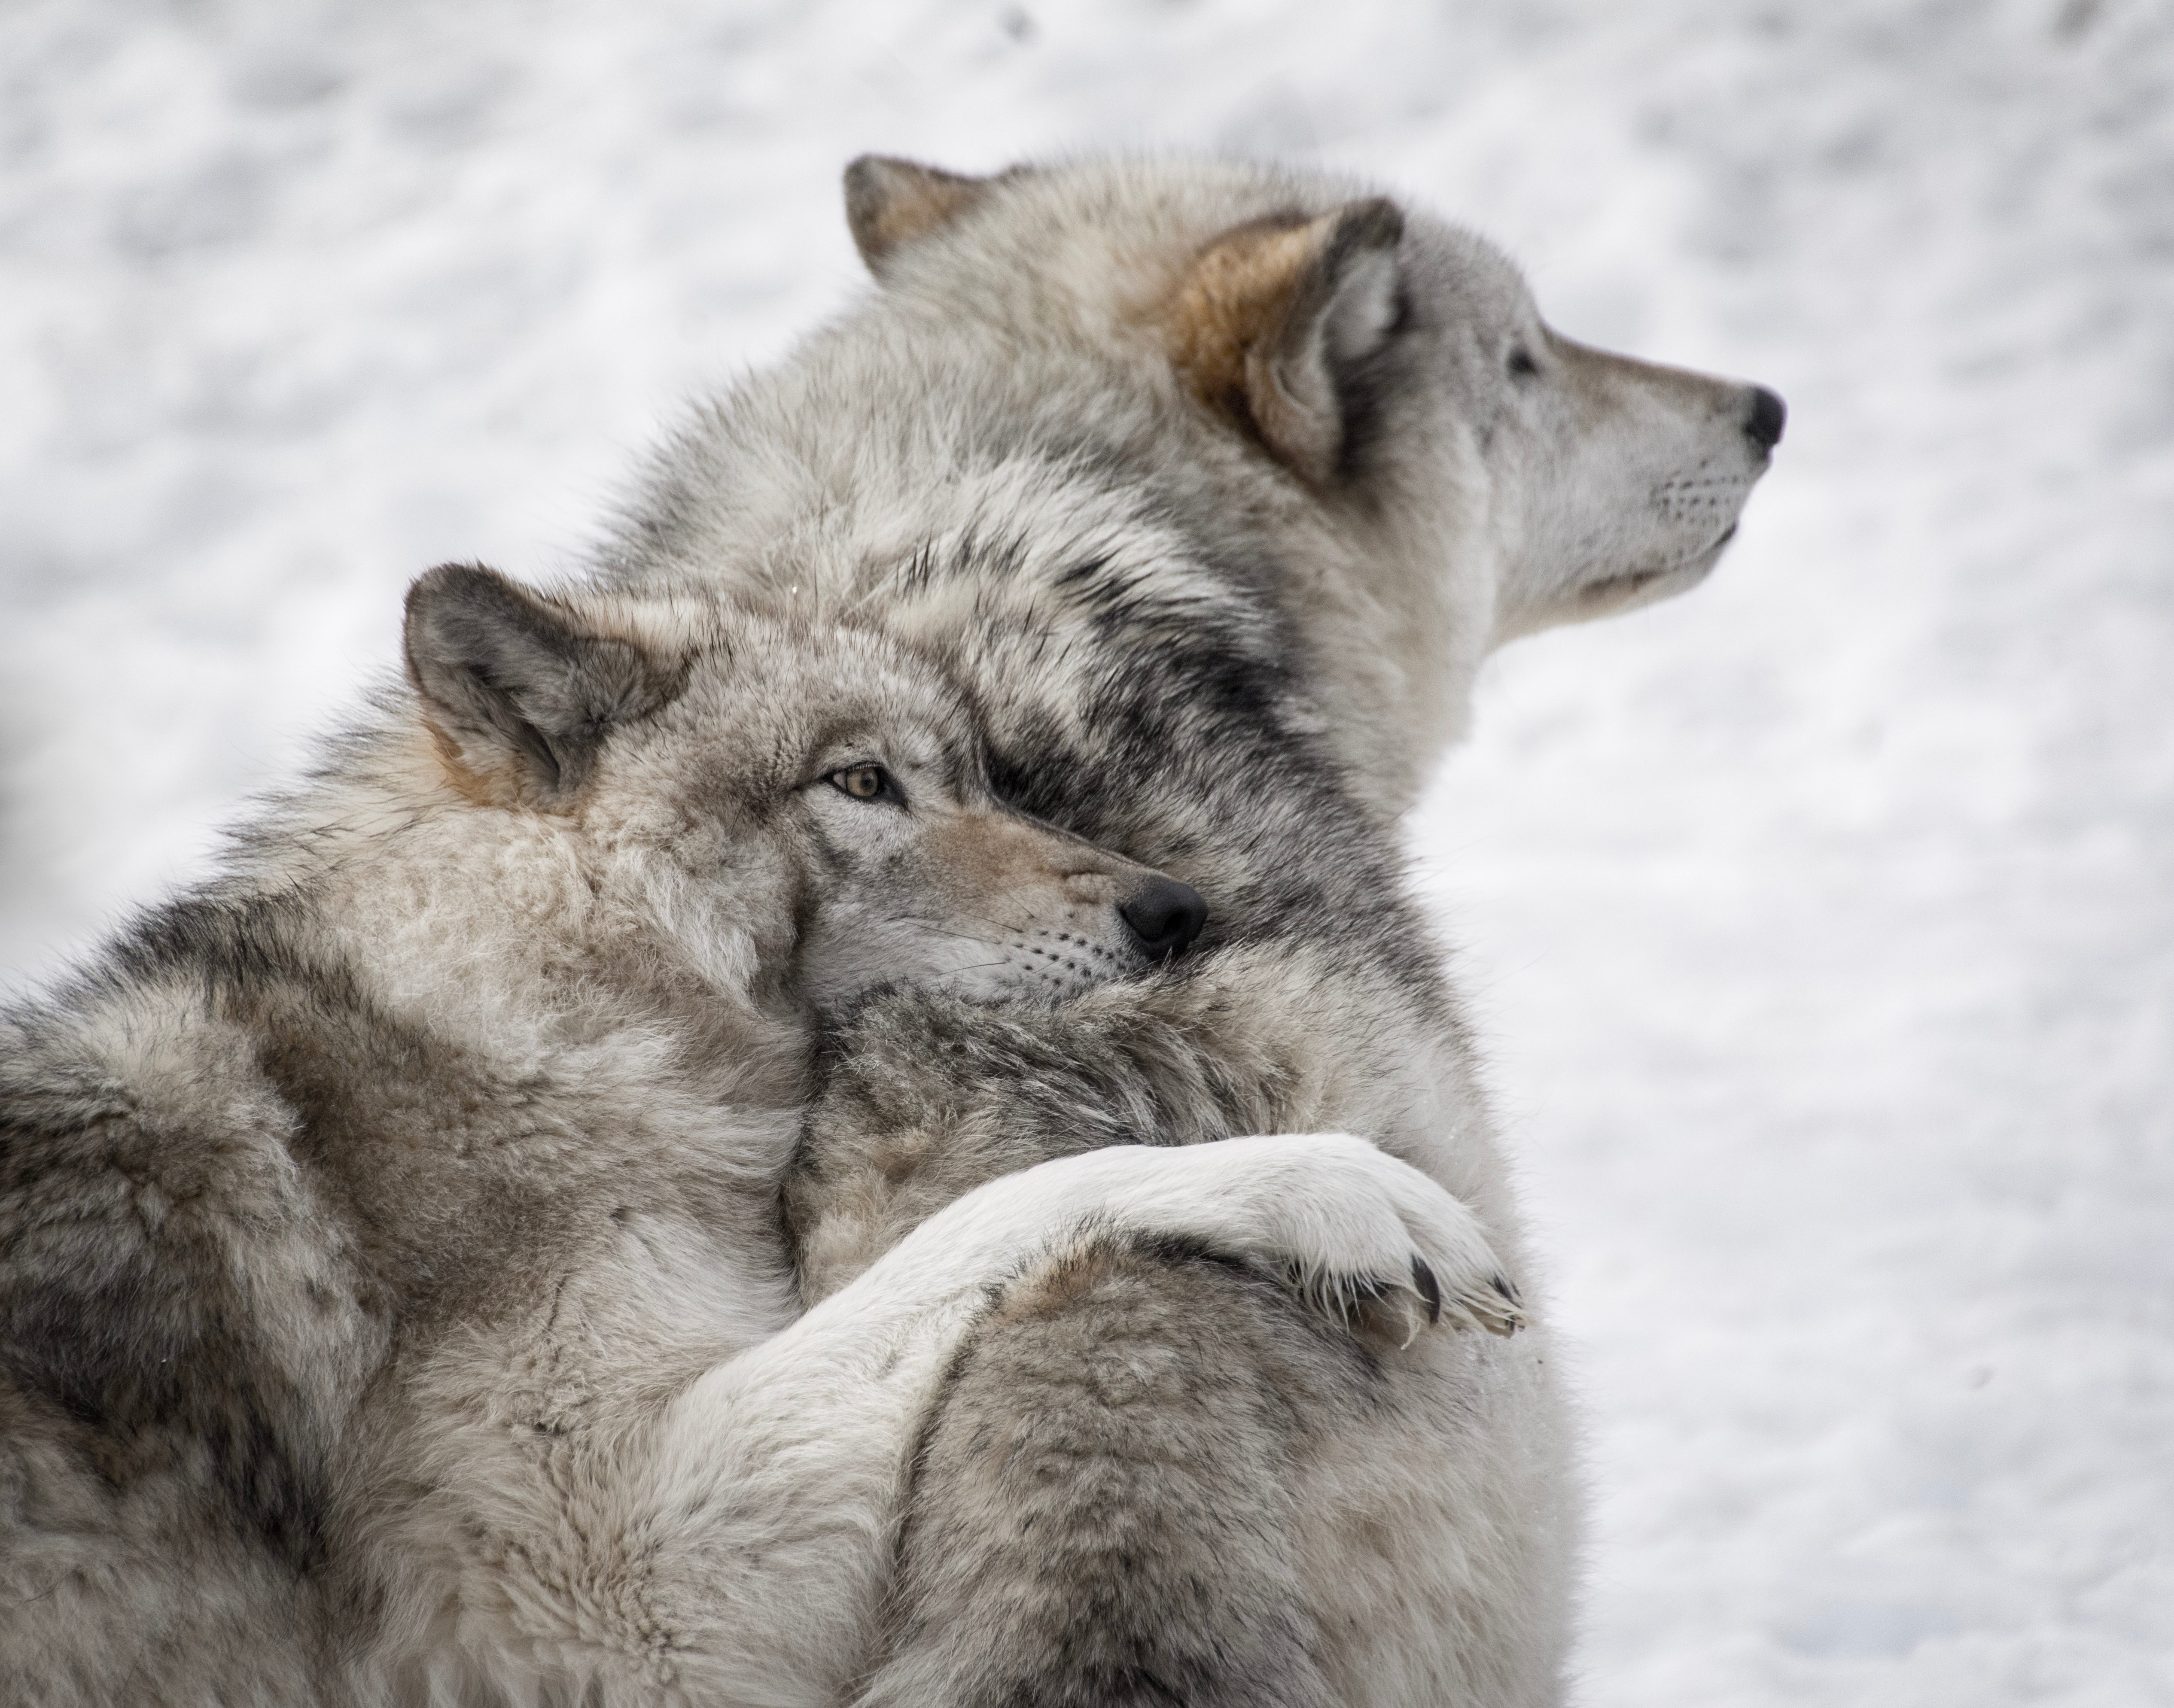 care, wildlife, wolfs, animals, dogs, couple, pair High Definition image